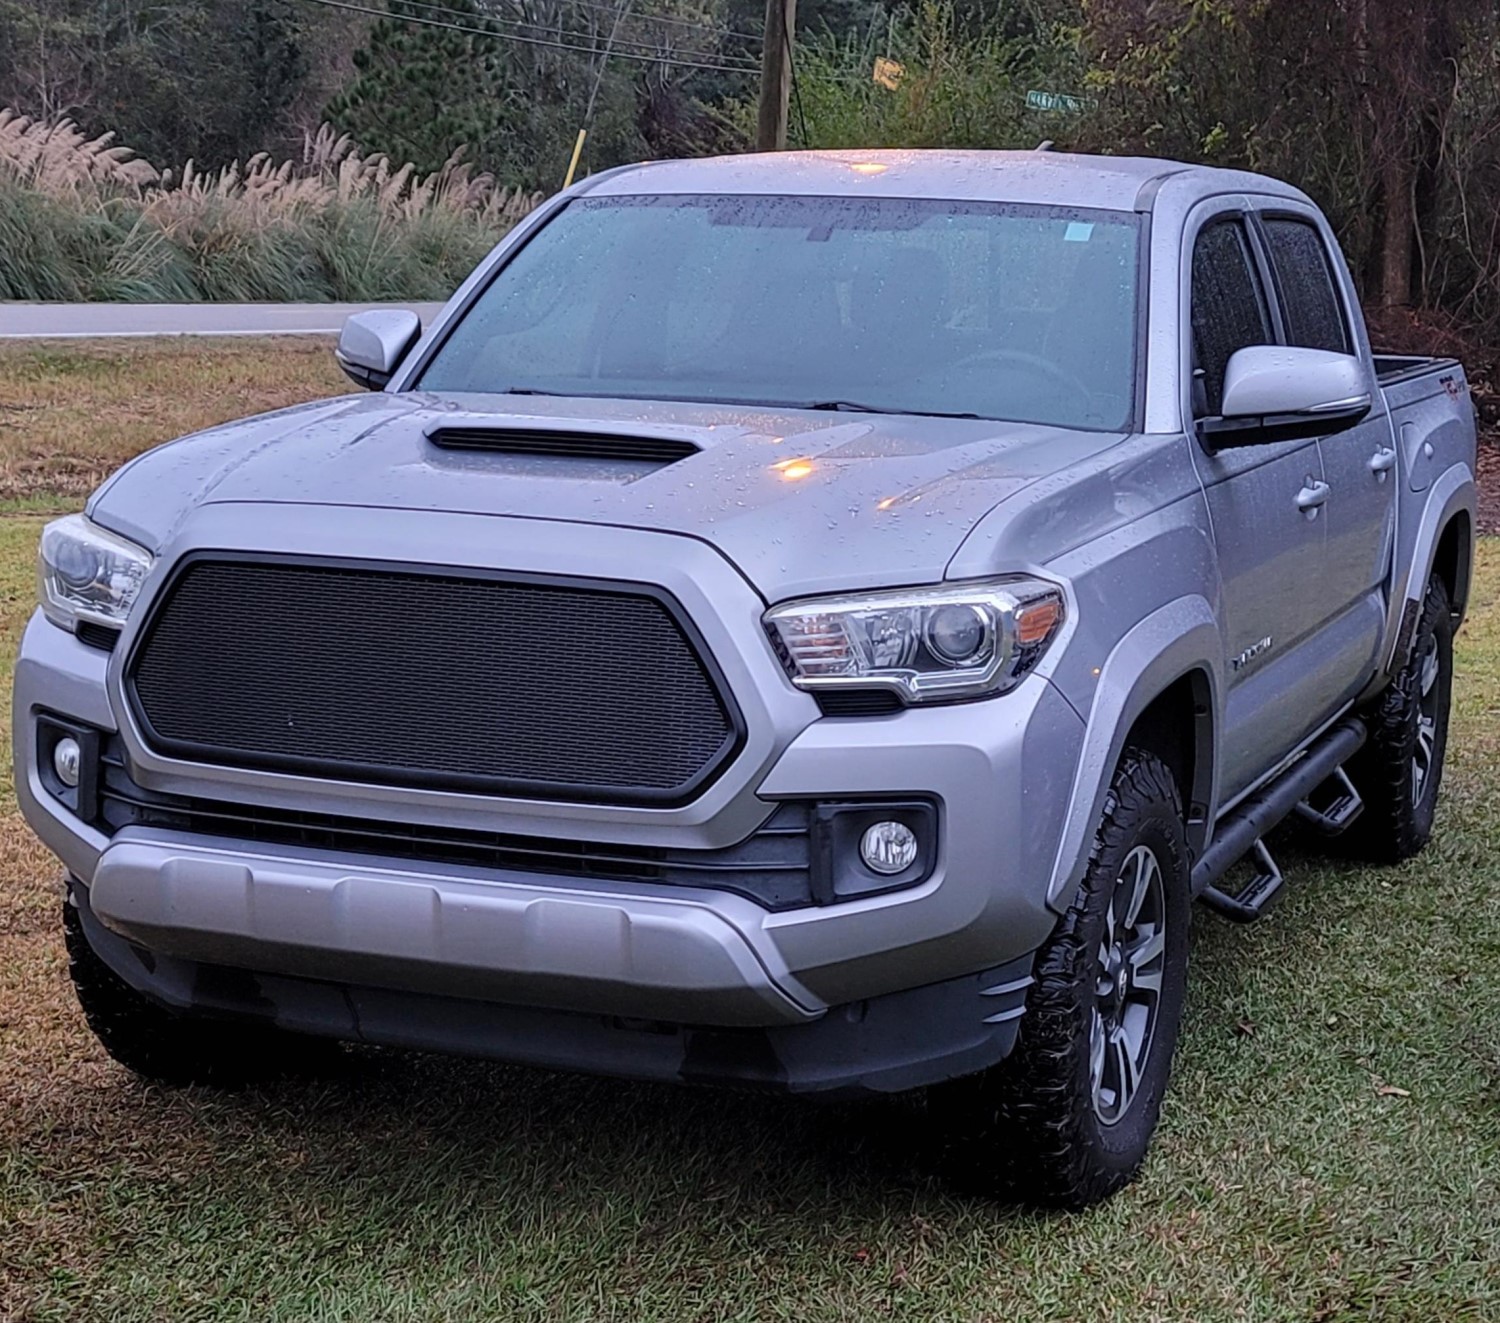 3rd generation Tacoma grille builds still strong while while 2024+ Tacoma grille is nearing final design